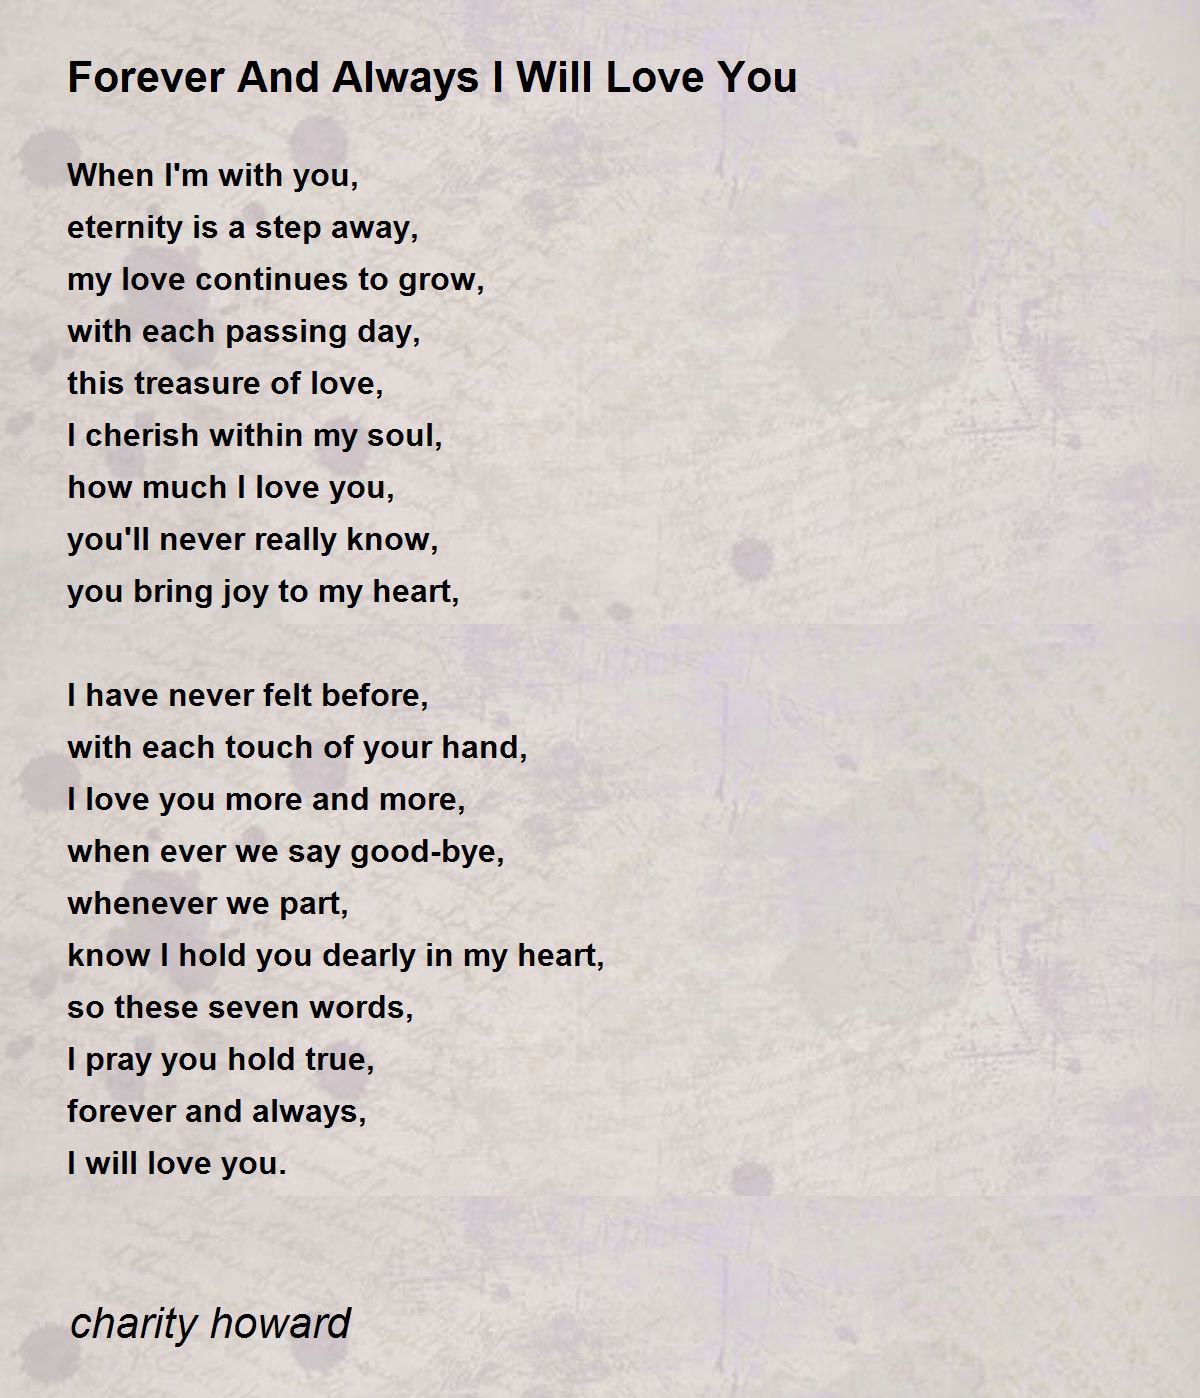 i will always love you poems